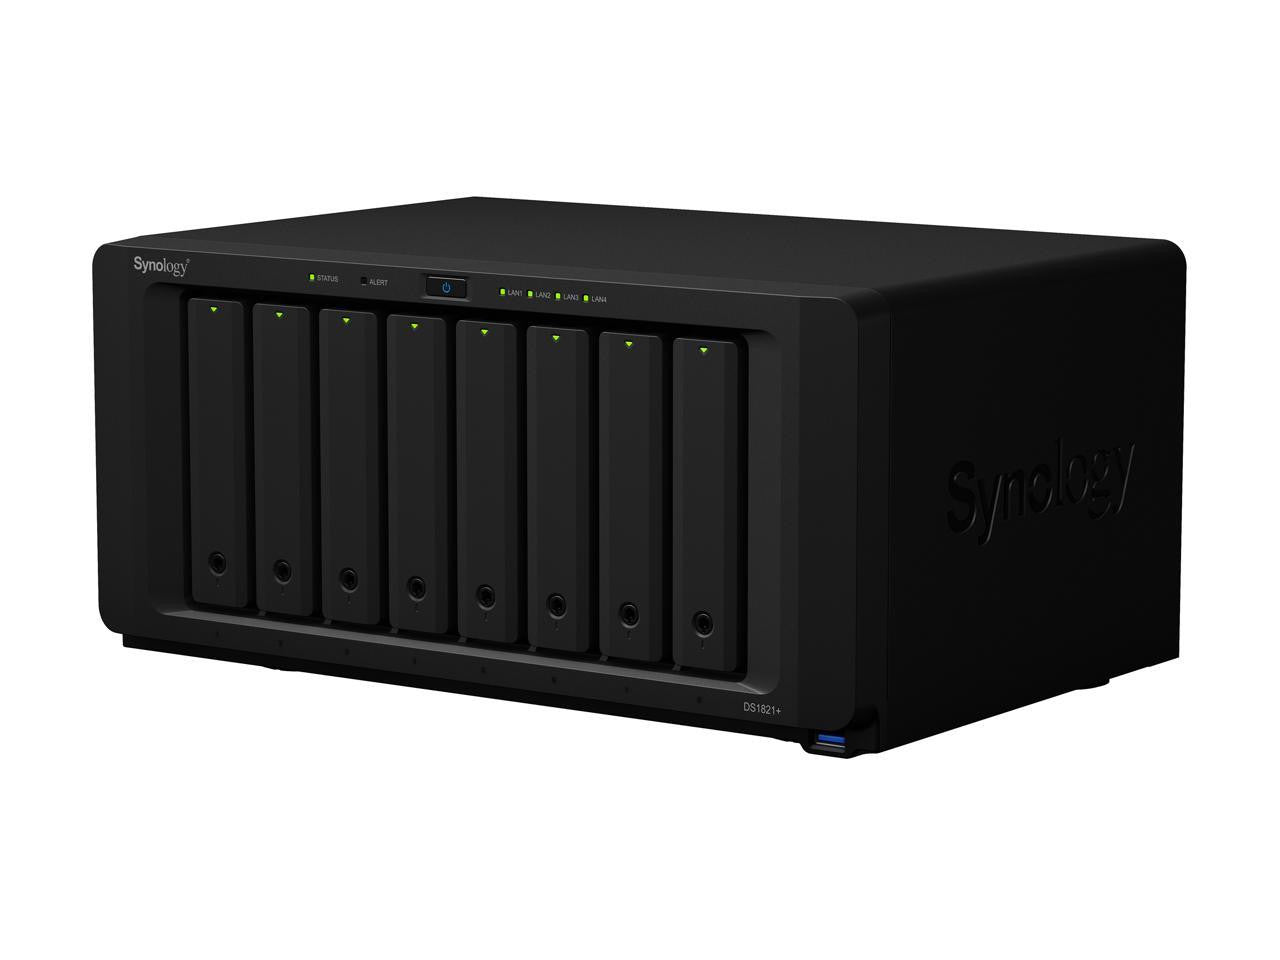 Synology DS1821+ 8-BAY DiskStation with 32GB Synology RAM and 24TB (8x3TB) Western Digital RED PLUS Drives Fully Assembled and Tested